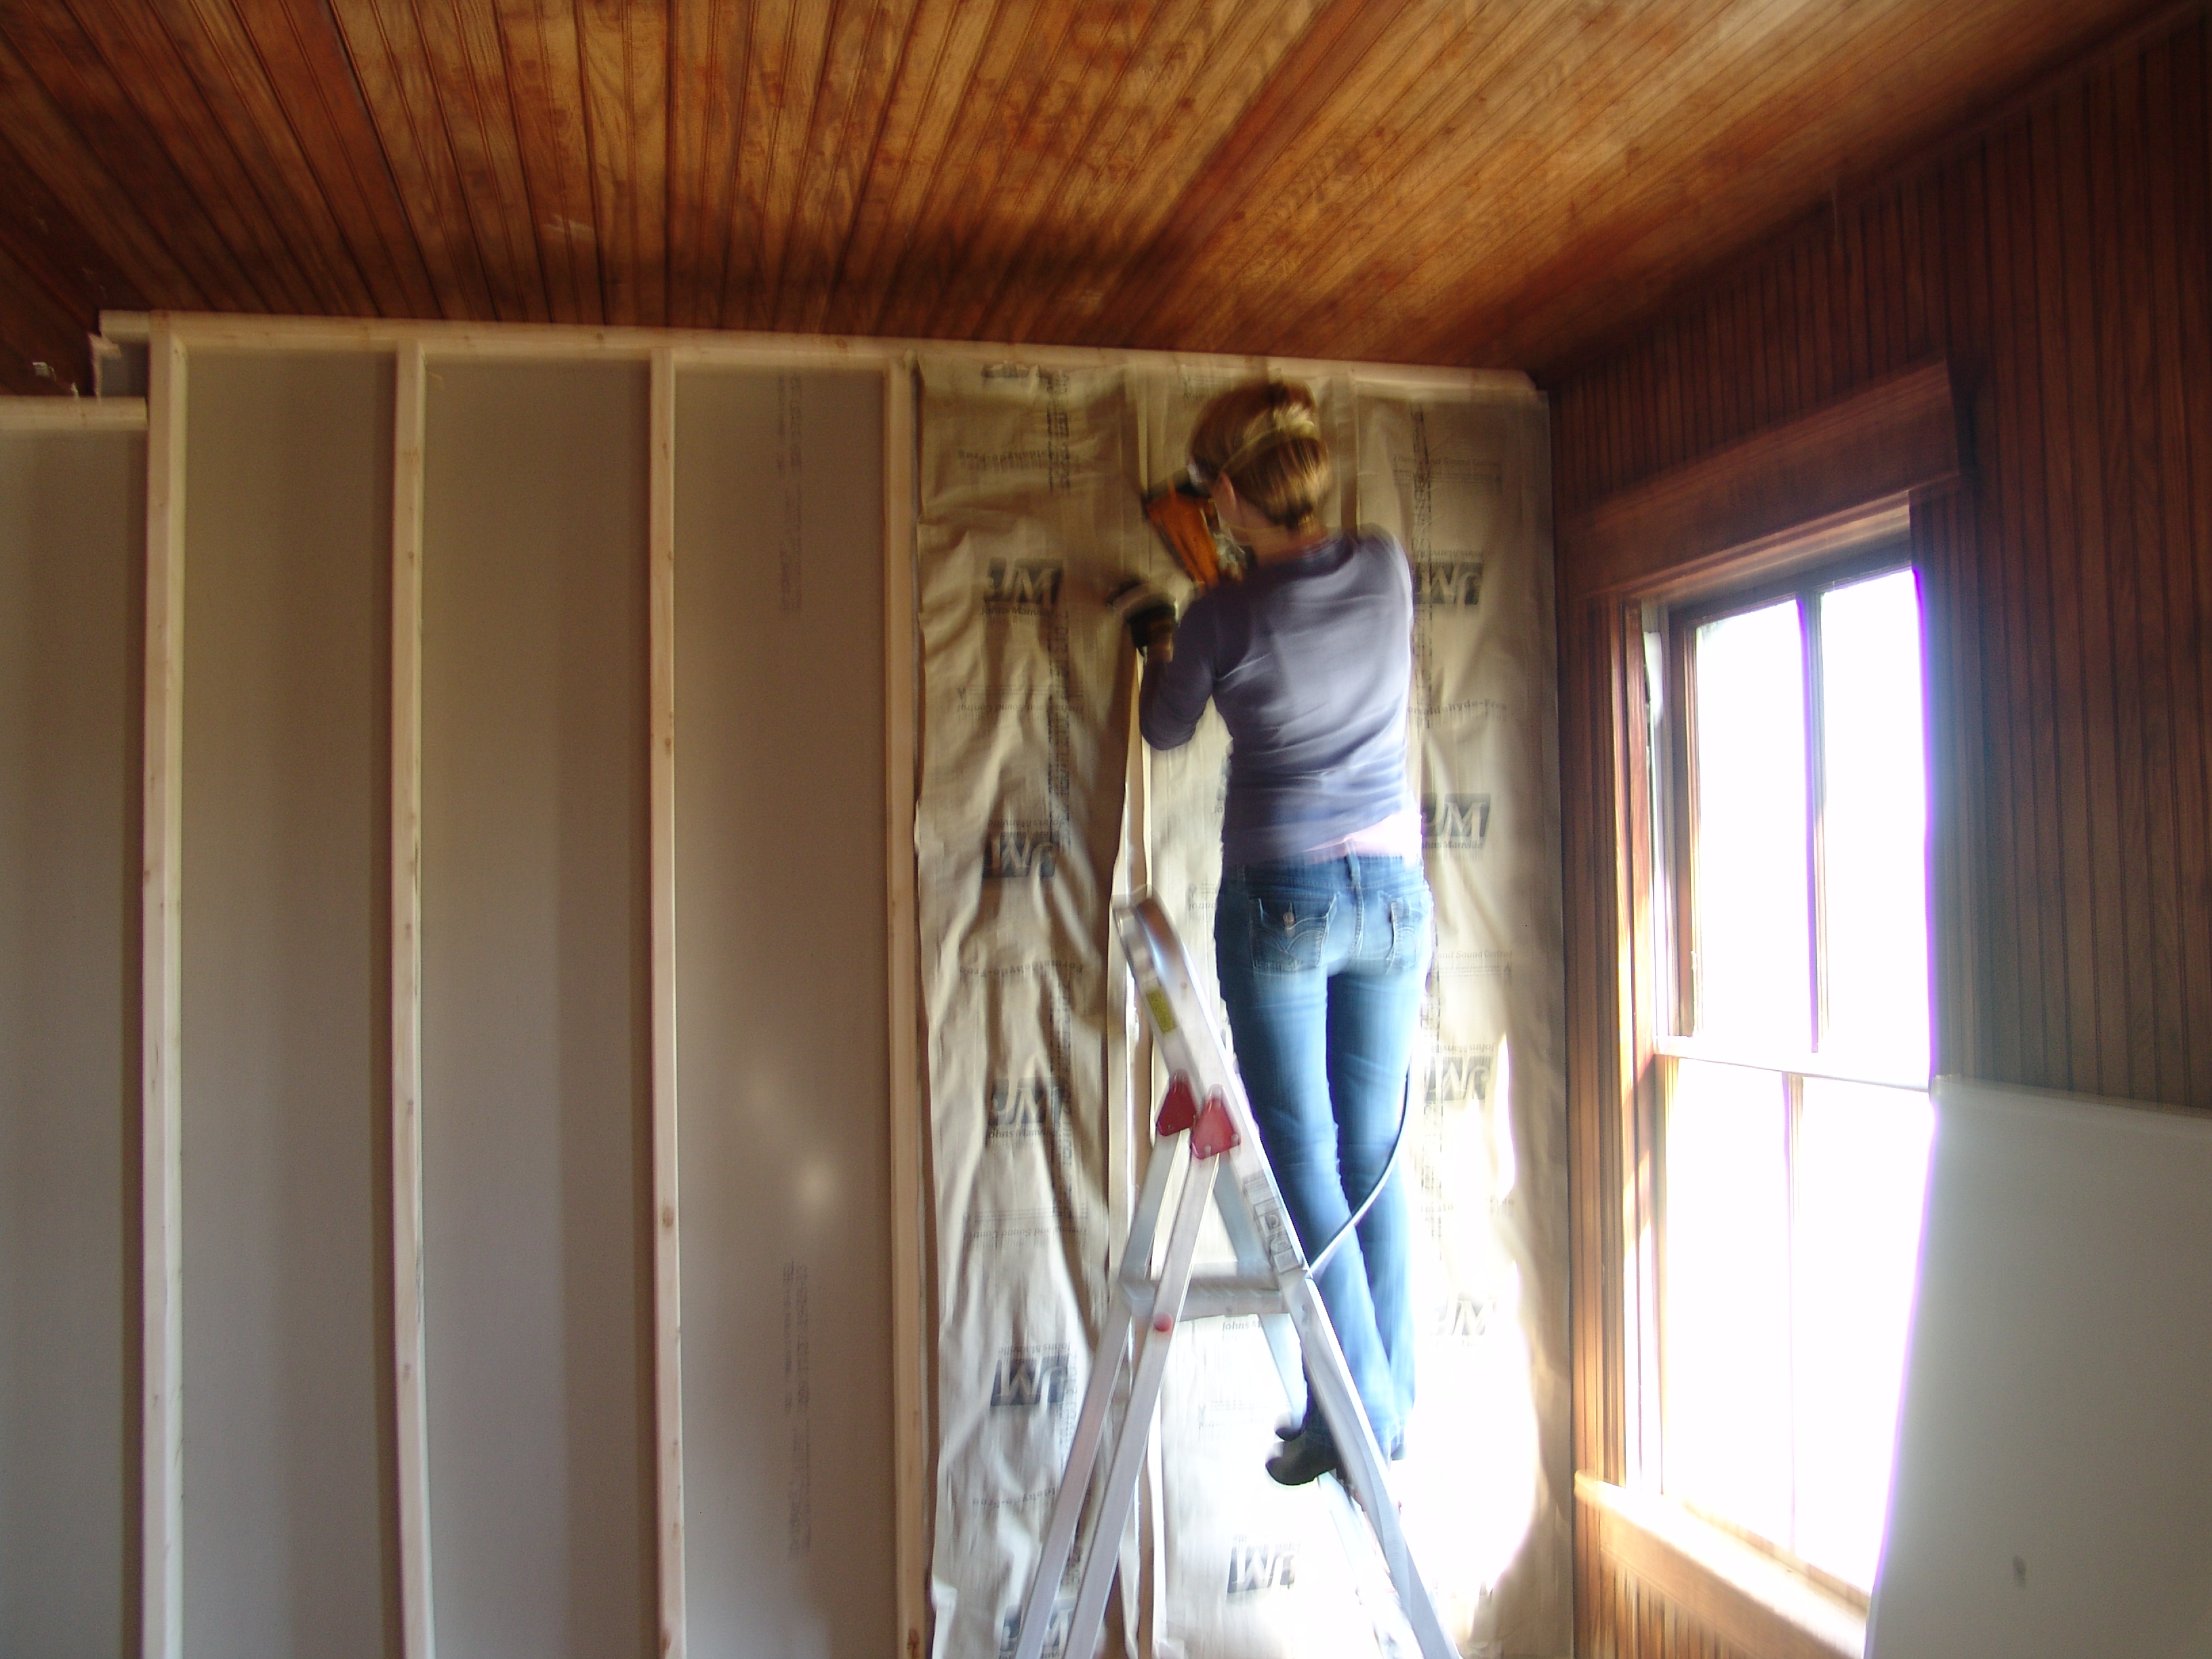 Putting in insulation, not my favorite thing.